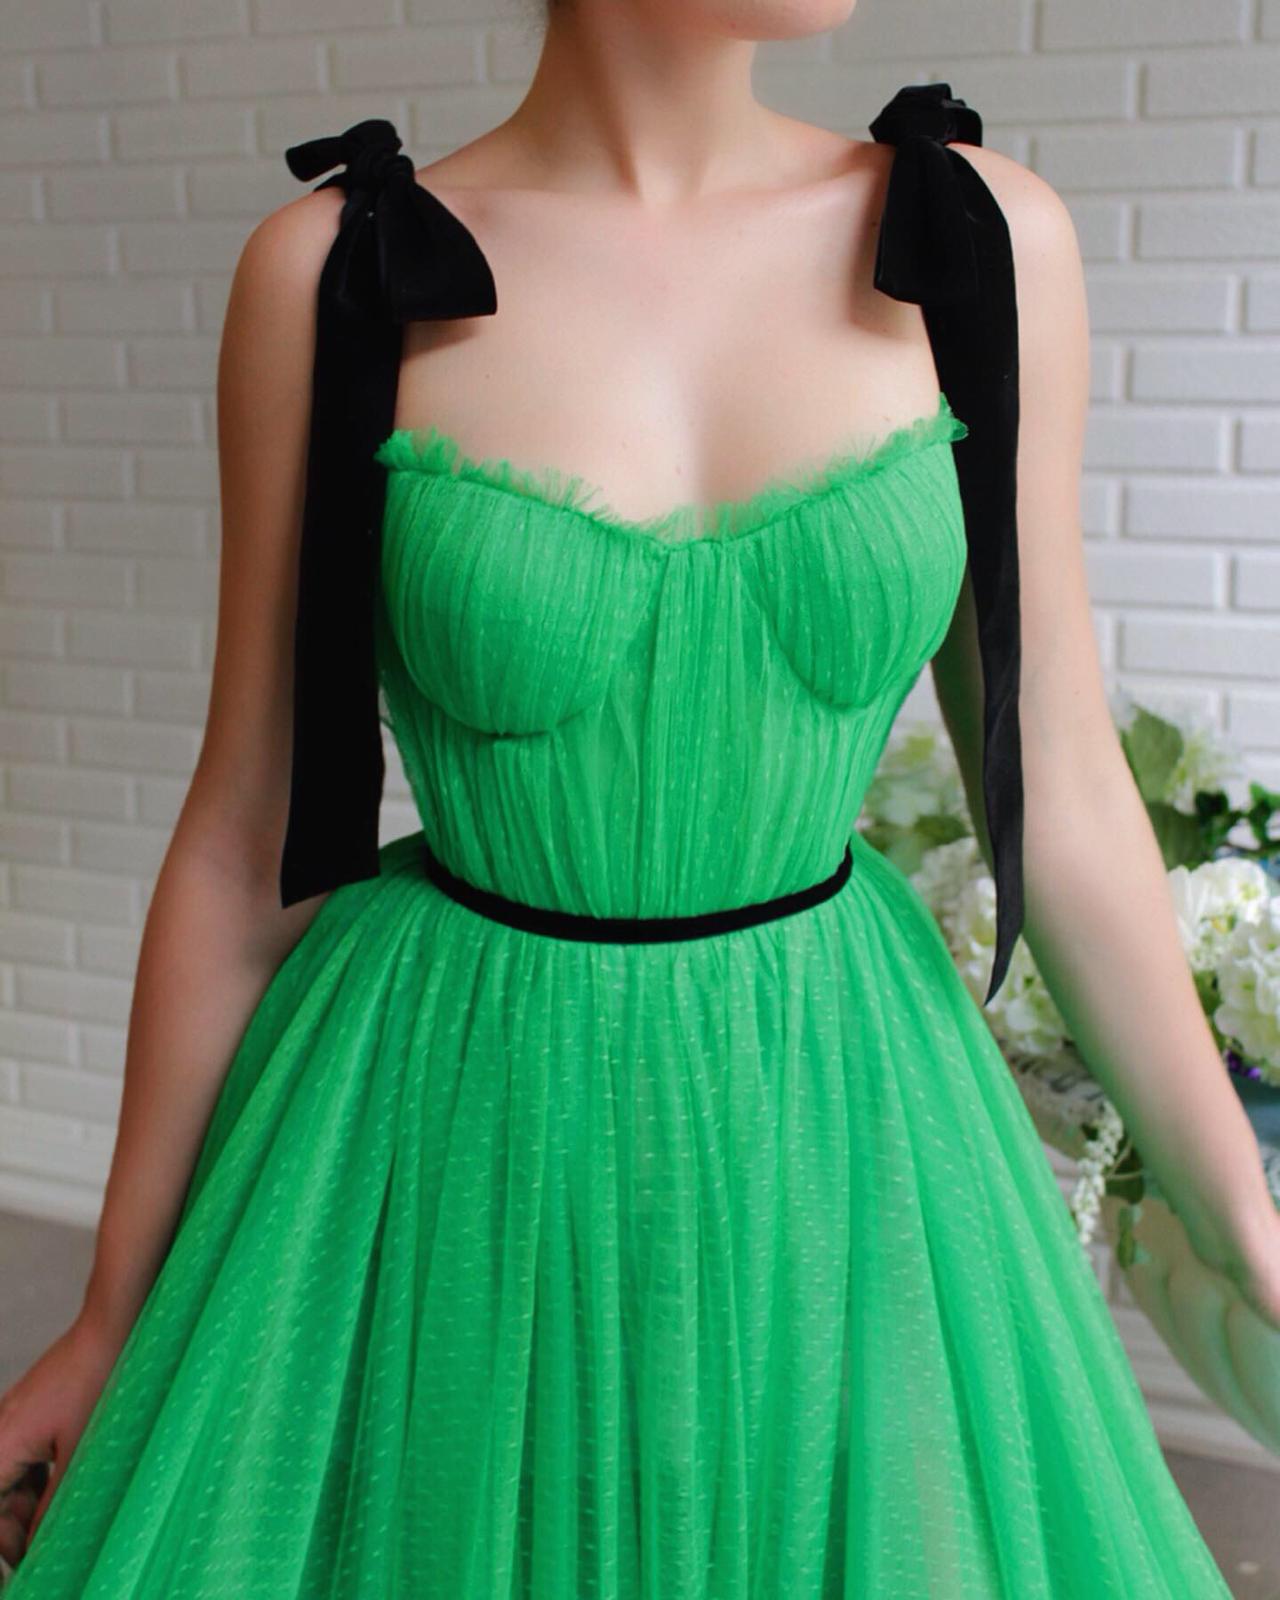 Green A-Line dress with black straps